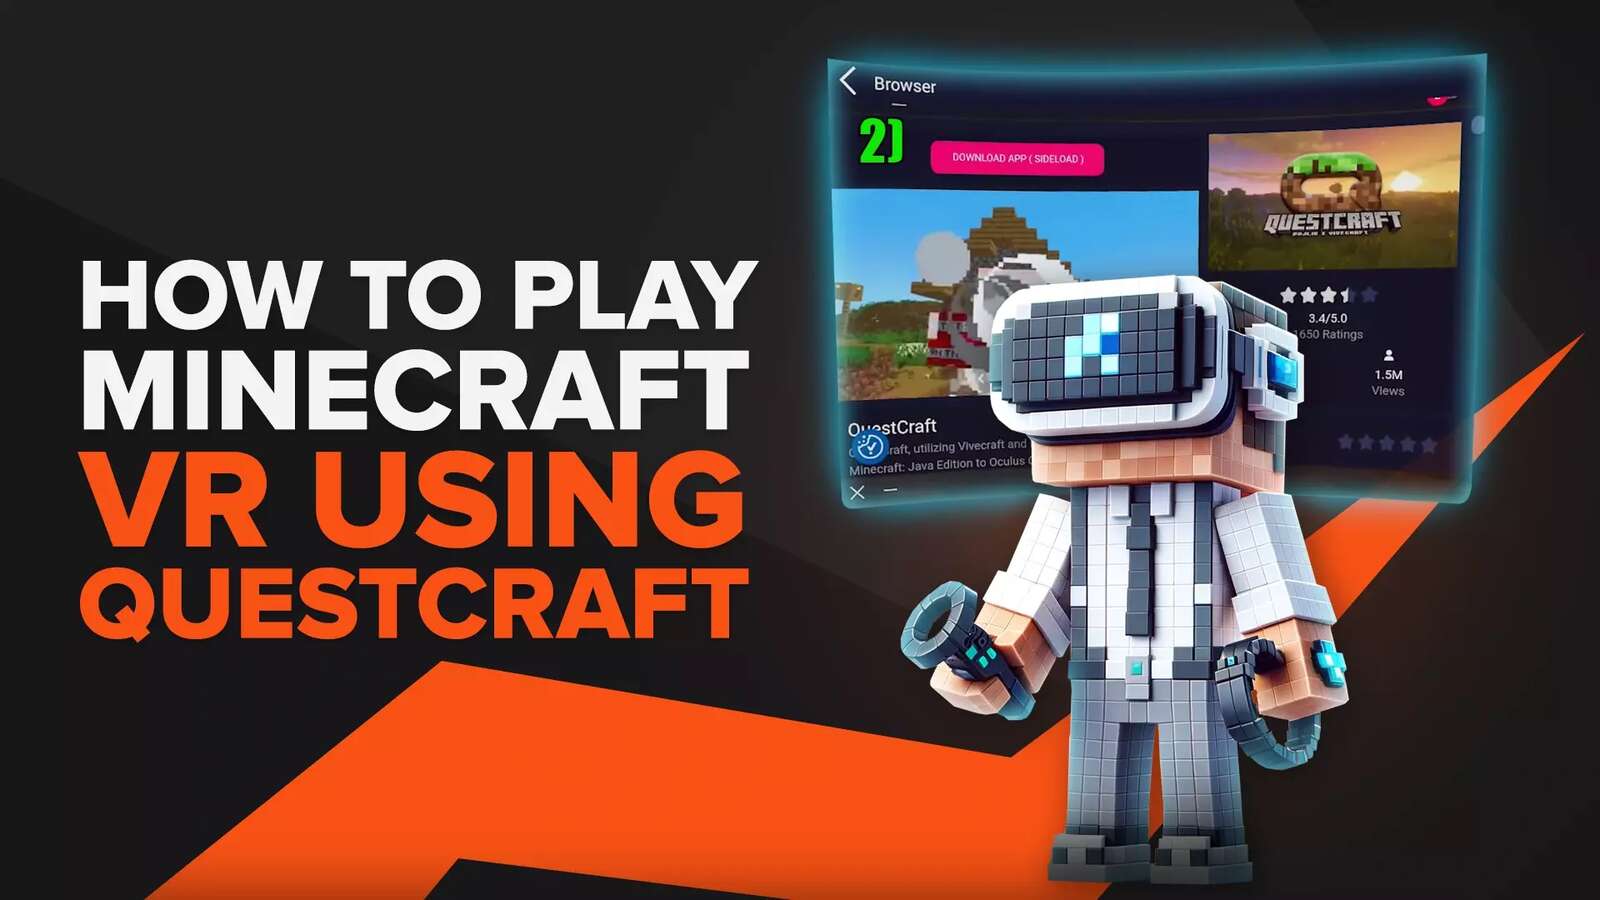 How to Download and Play Minecraft VR Using Questcraft